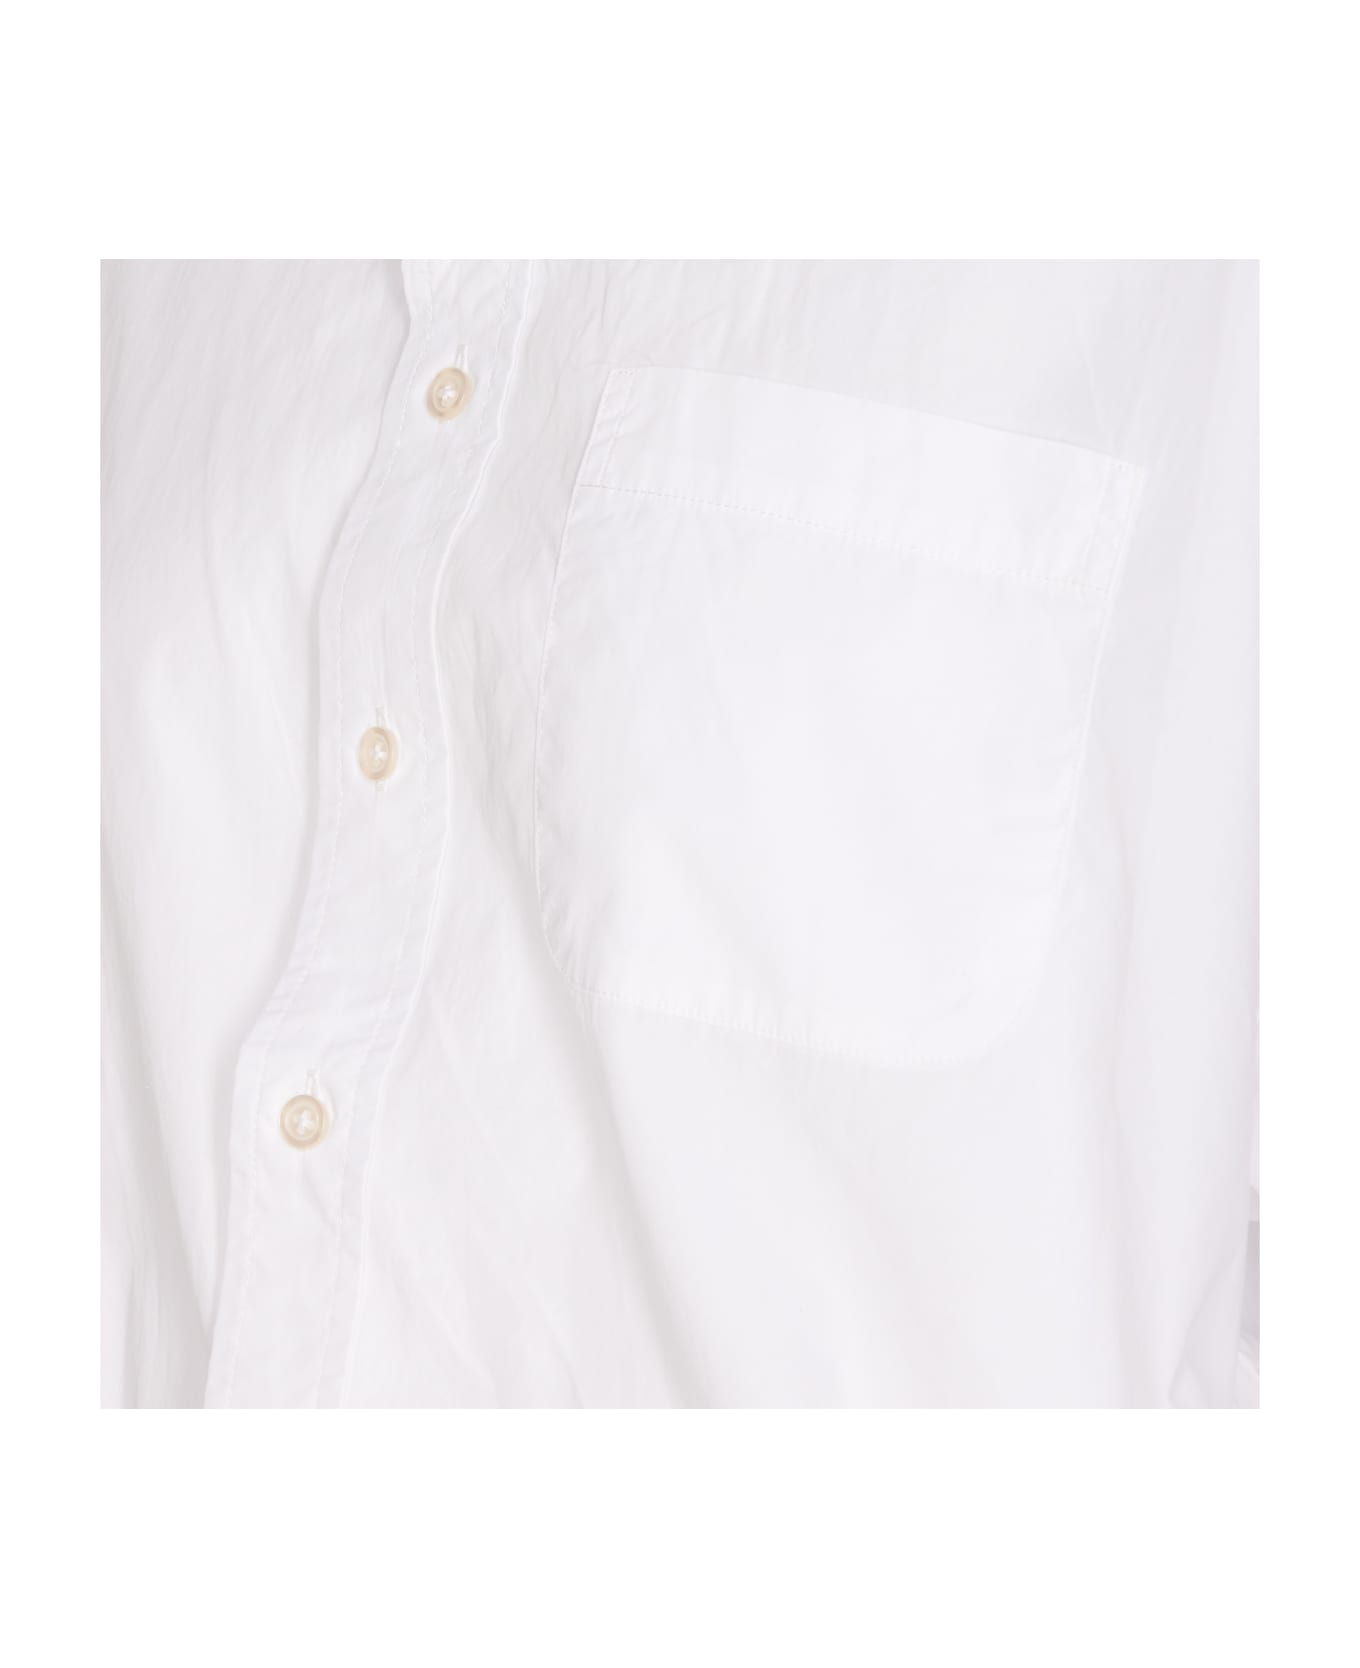 R13 Crossover Bubble Shirt - White